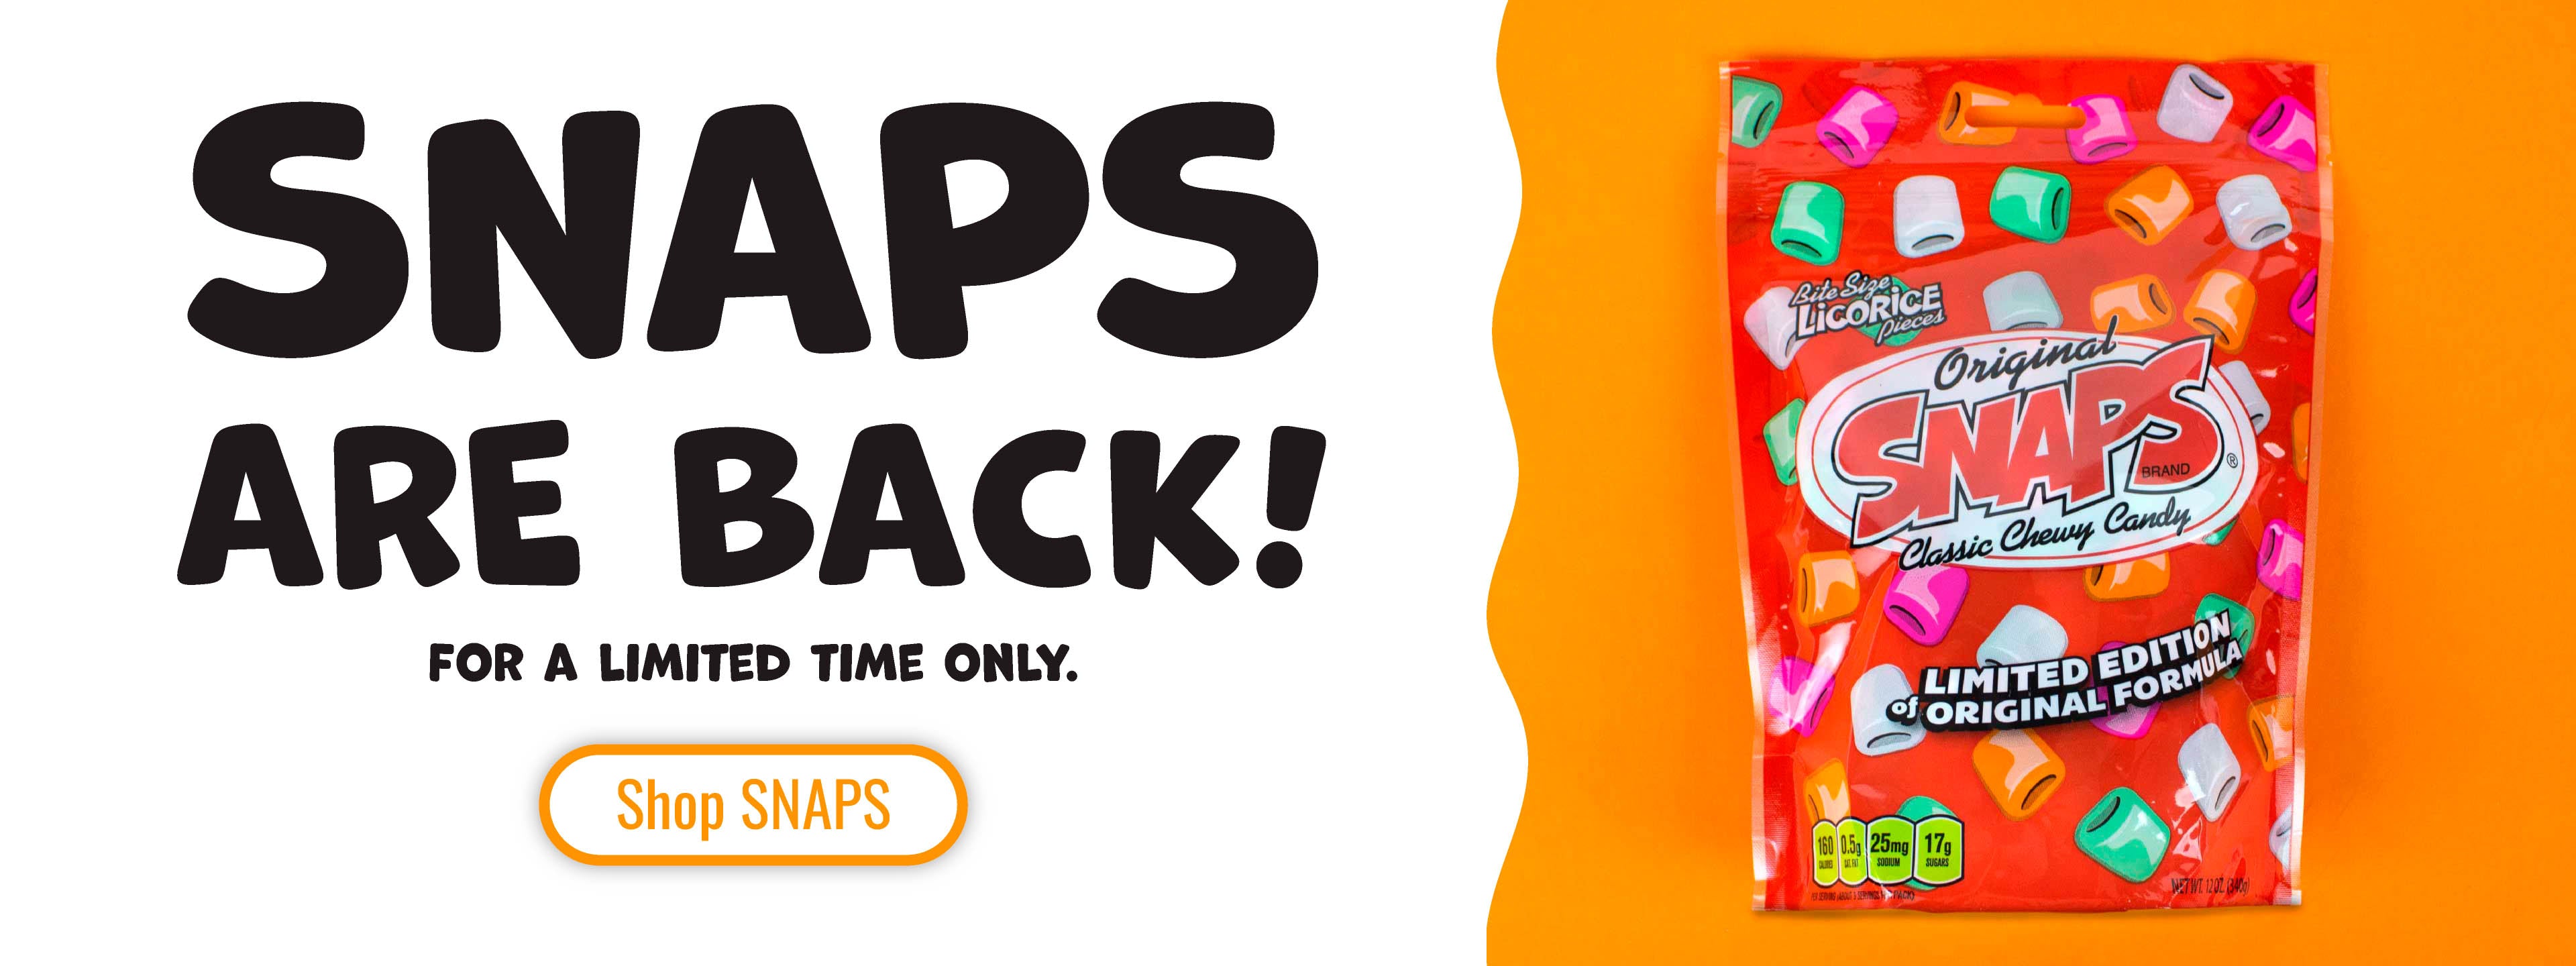 SNAPS are back! For a limited time only. Click to shop